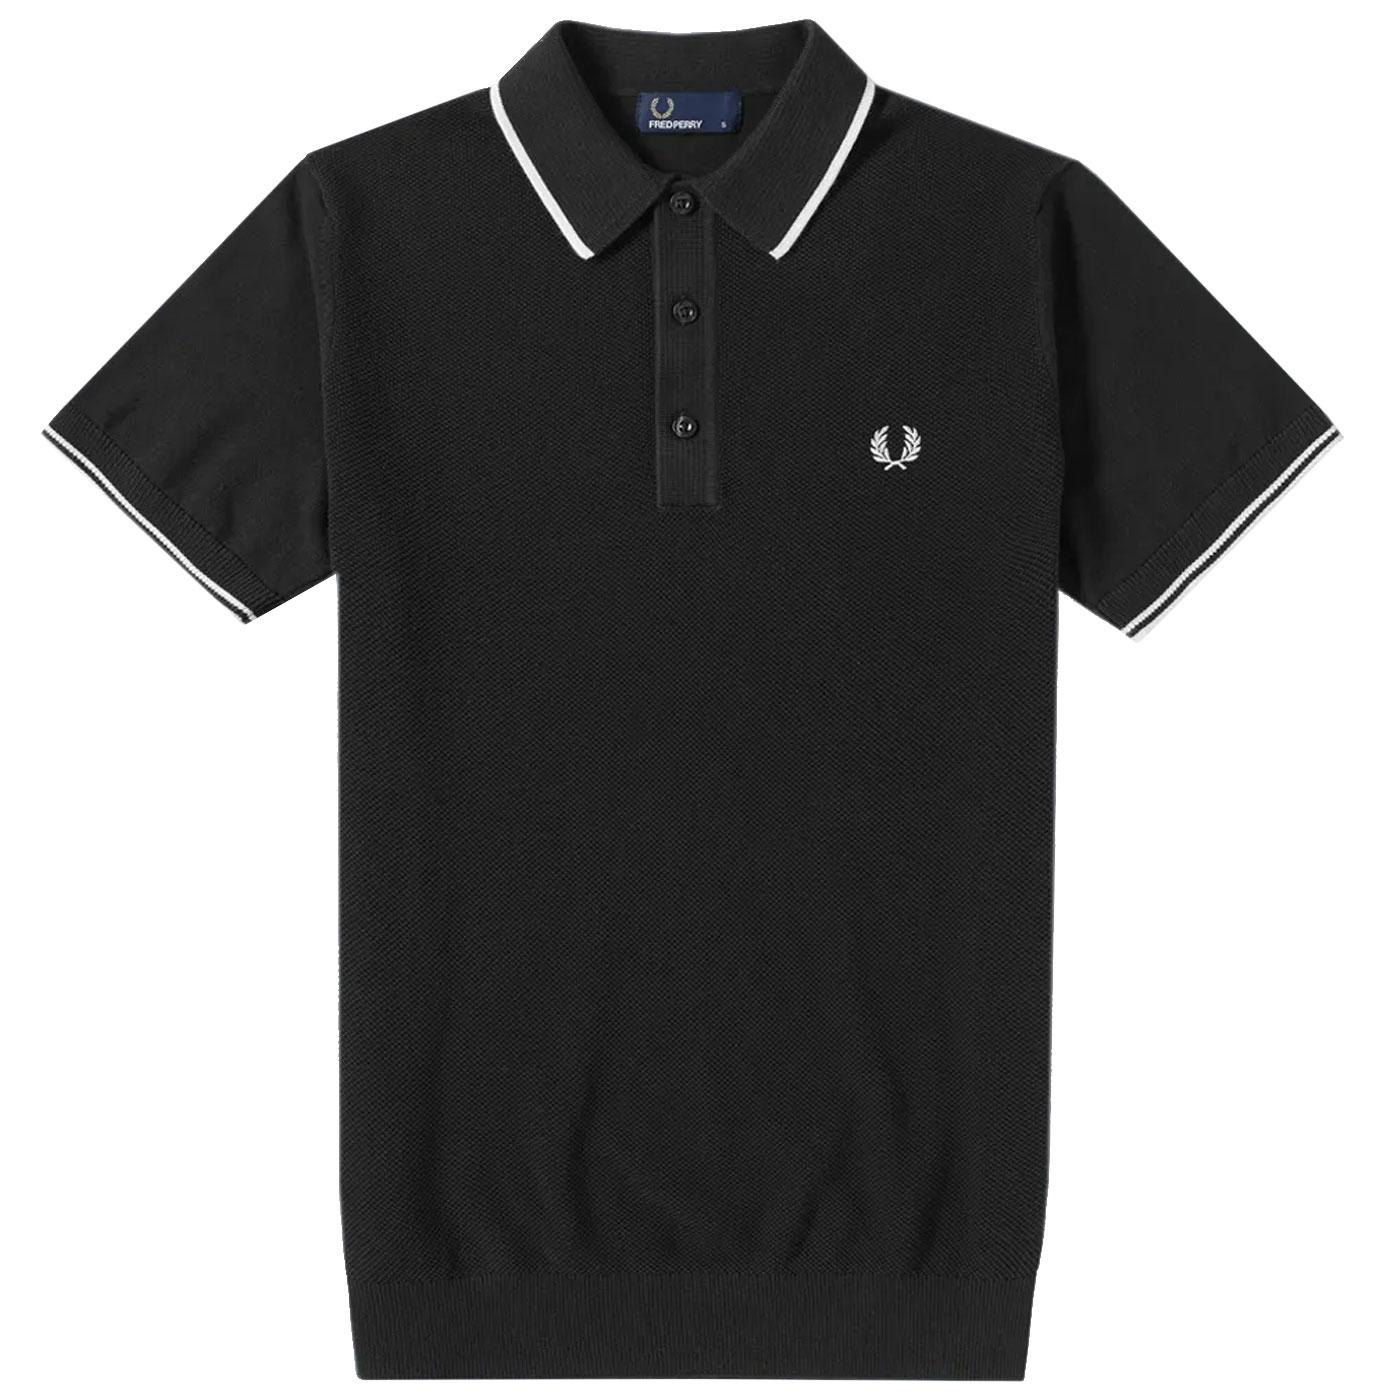 FRED PERRY Men's Mod Tipped Knitted Polo Shirt 